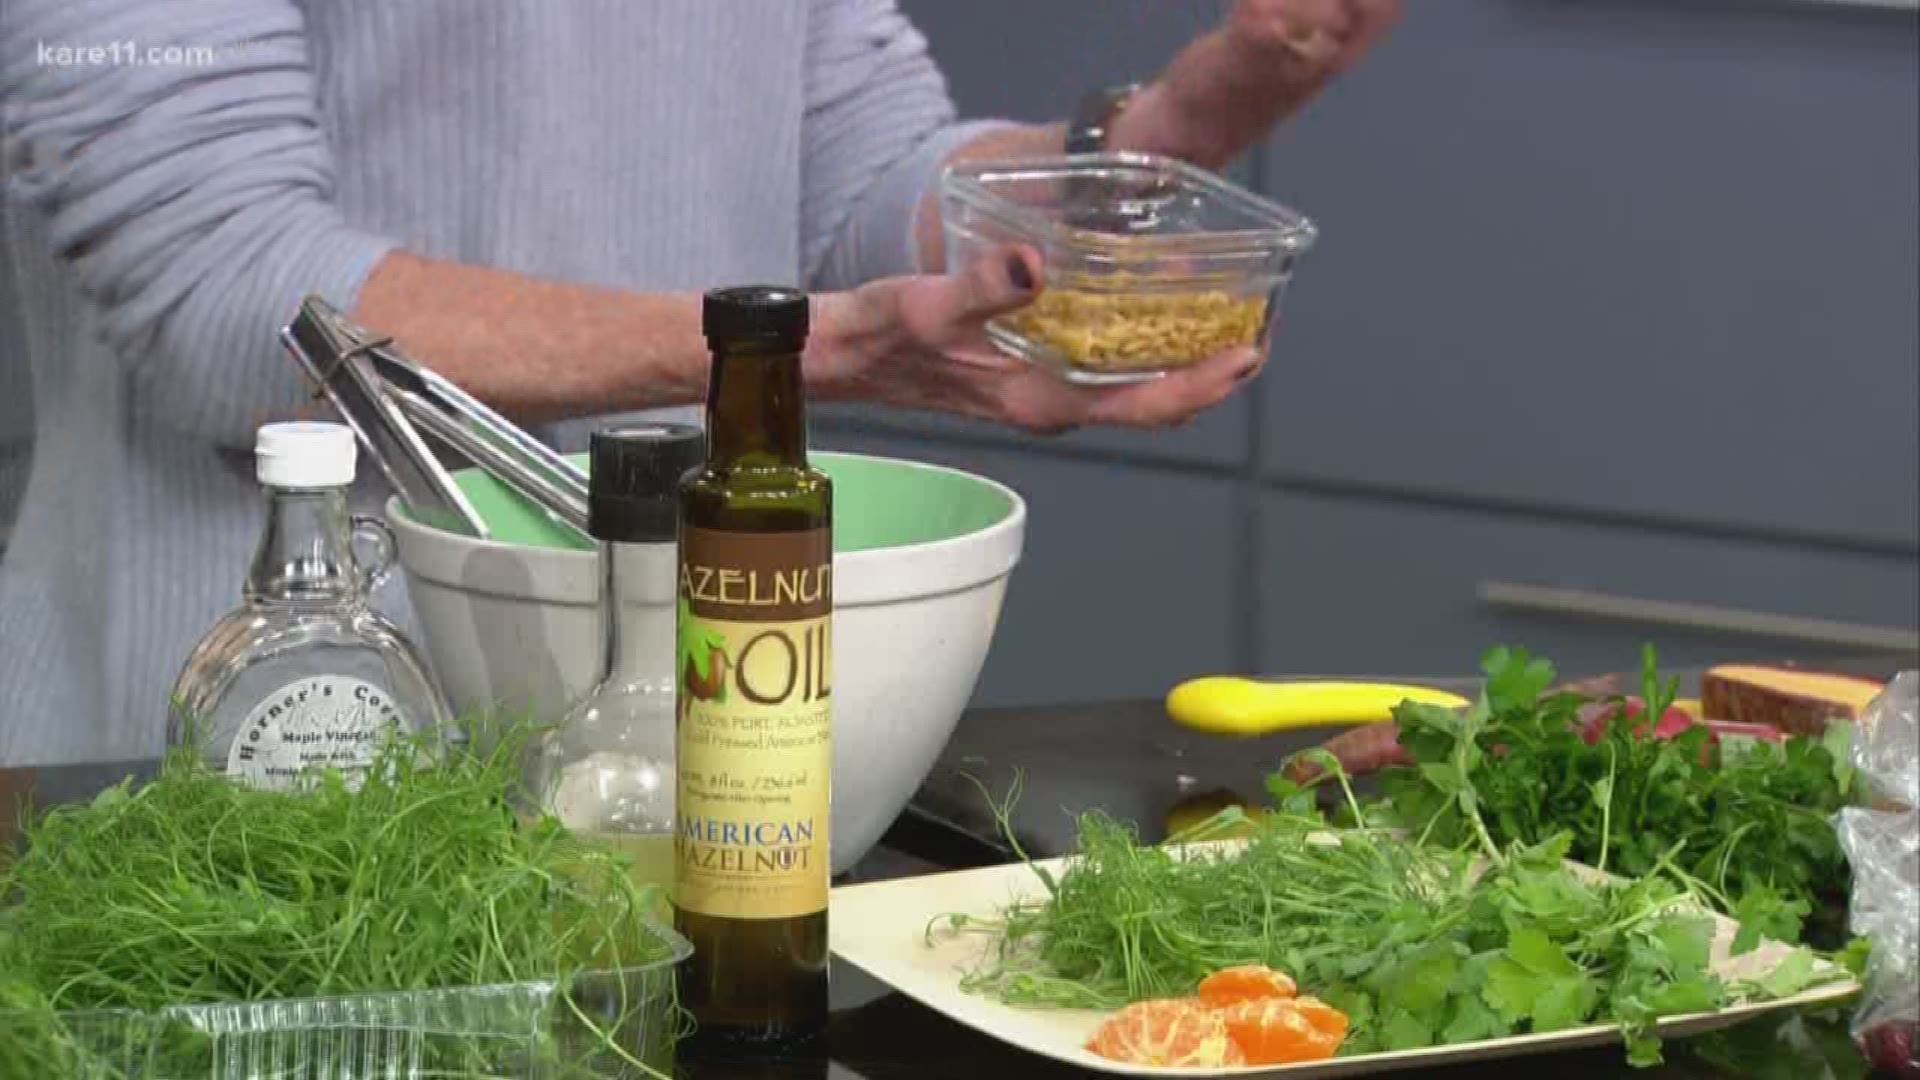 Chef Beth Dooley shows us how to make 'Rye Berry Salad with Watercress, Craisins and Walnuts.'